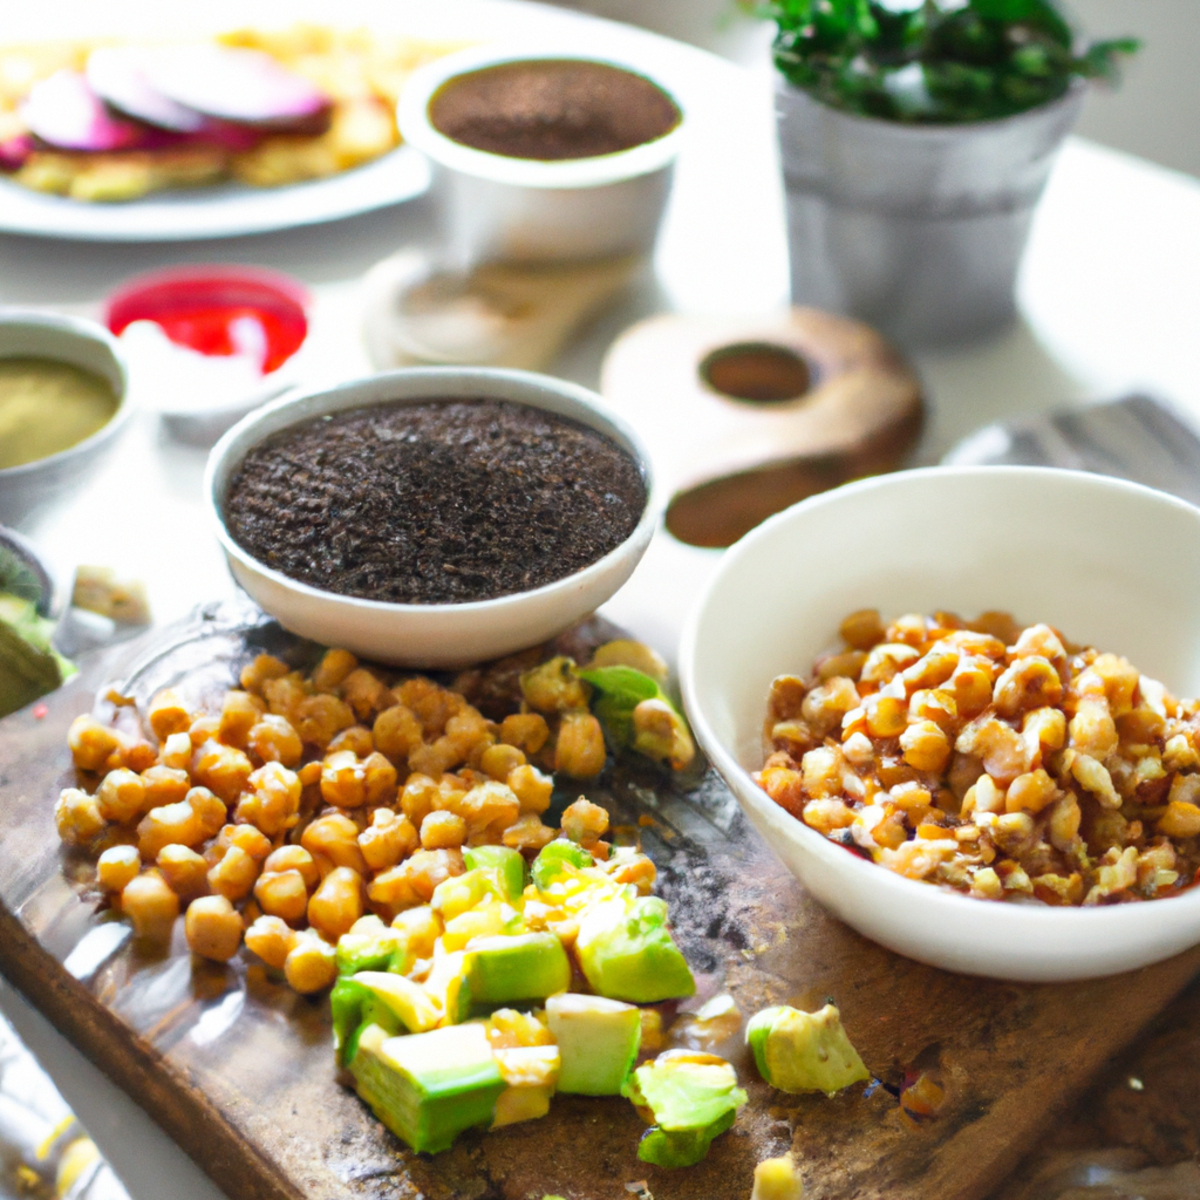 The photo captures a colorful array of plant-based protein sources, arranged neatly on a wooden cutting board. In the foreground, a handful of roasted chickpeas glisten with a light coating of olive oil and spices. Behind them, a pile of quinoa grains sits next to a bowl of sliced avocado, both offering a healthy dose of protein and healthy fats. A few slices of tofu are arranged in a fan shape, showcasing their versatility as a meat substitute. In the background, a bunch of leafy greens and a few bright red cherry tomatoes add a pop of color to the scene. The photo exudes a sense of freshness and vitality, inviting readers to explore the world of plant-based protein and all the delicious options it has to offer.